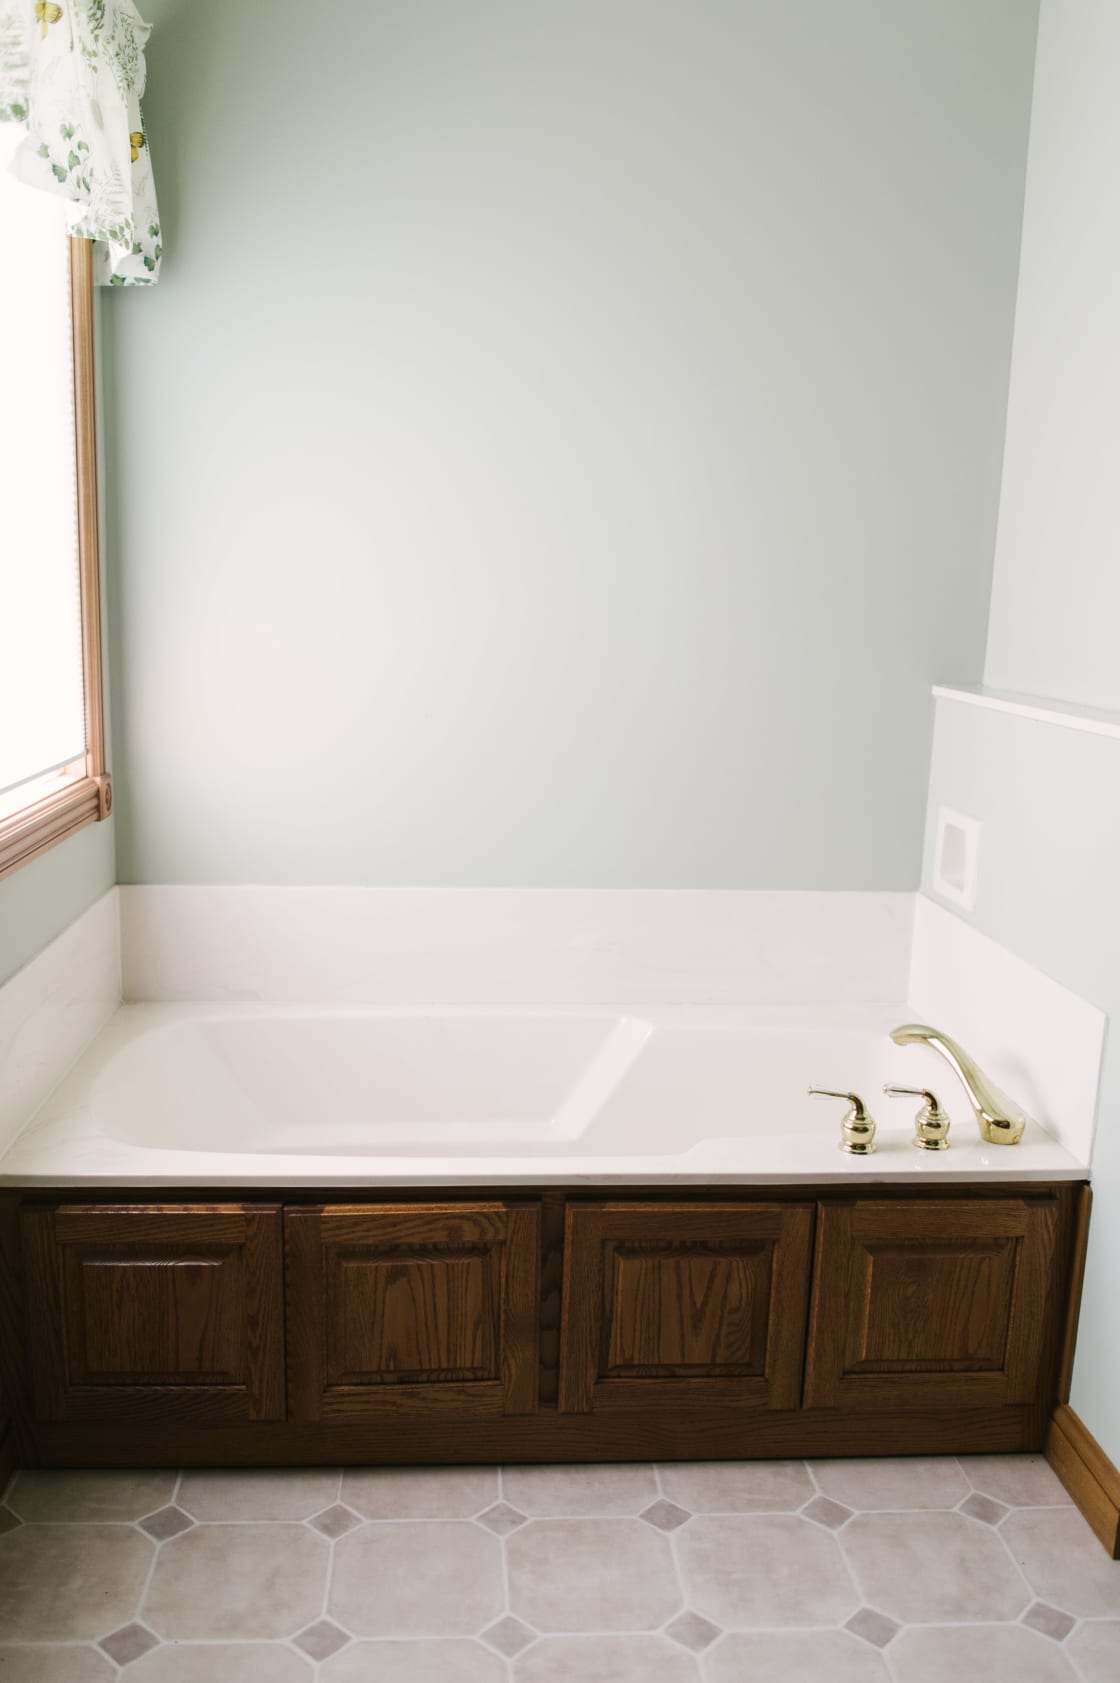 The master bath is the perfect place to unwind after a day of adventure on the farm!